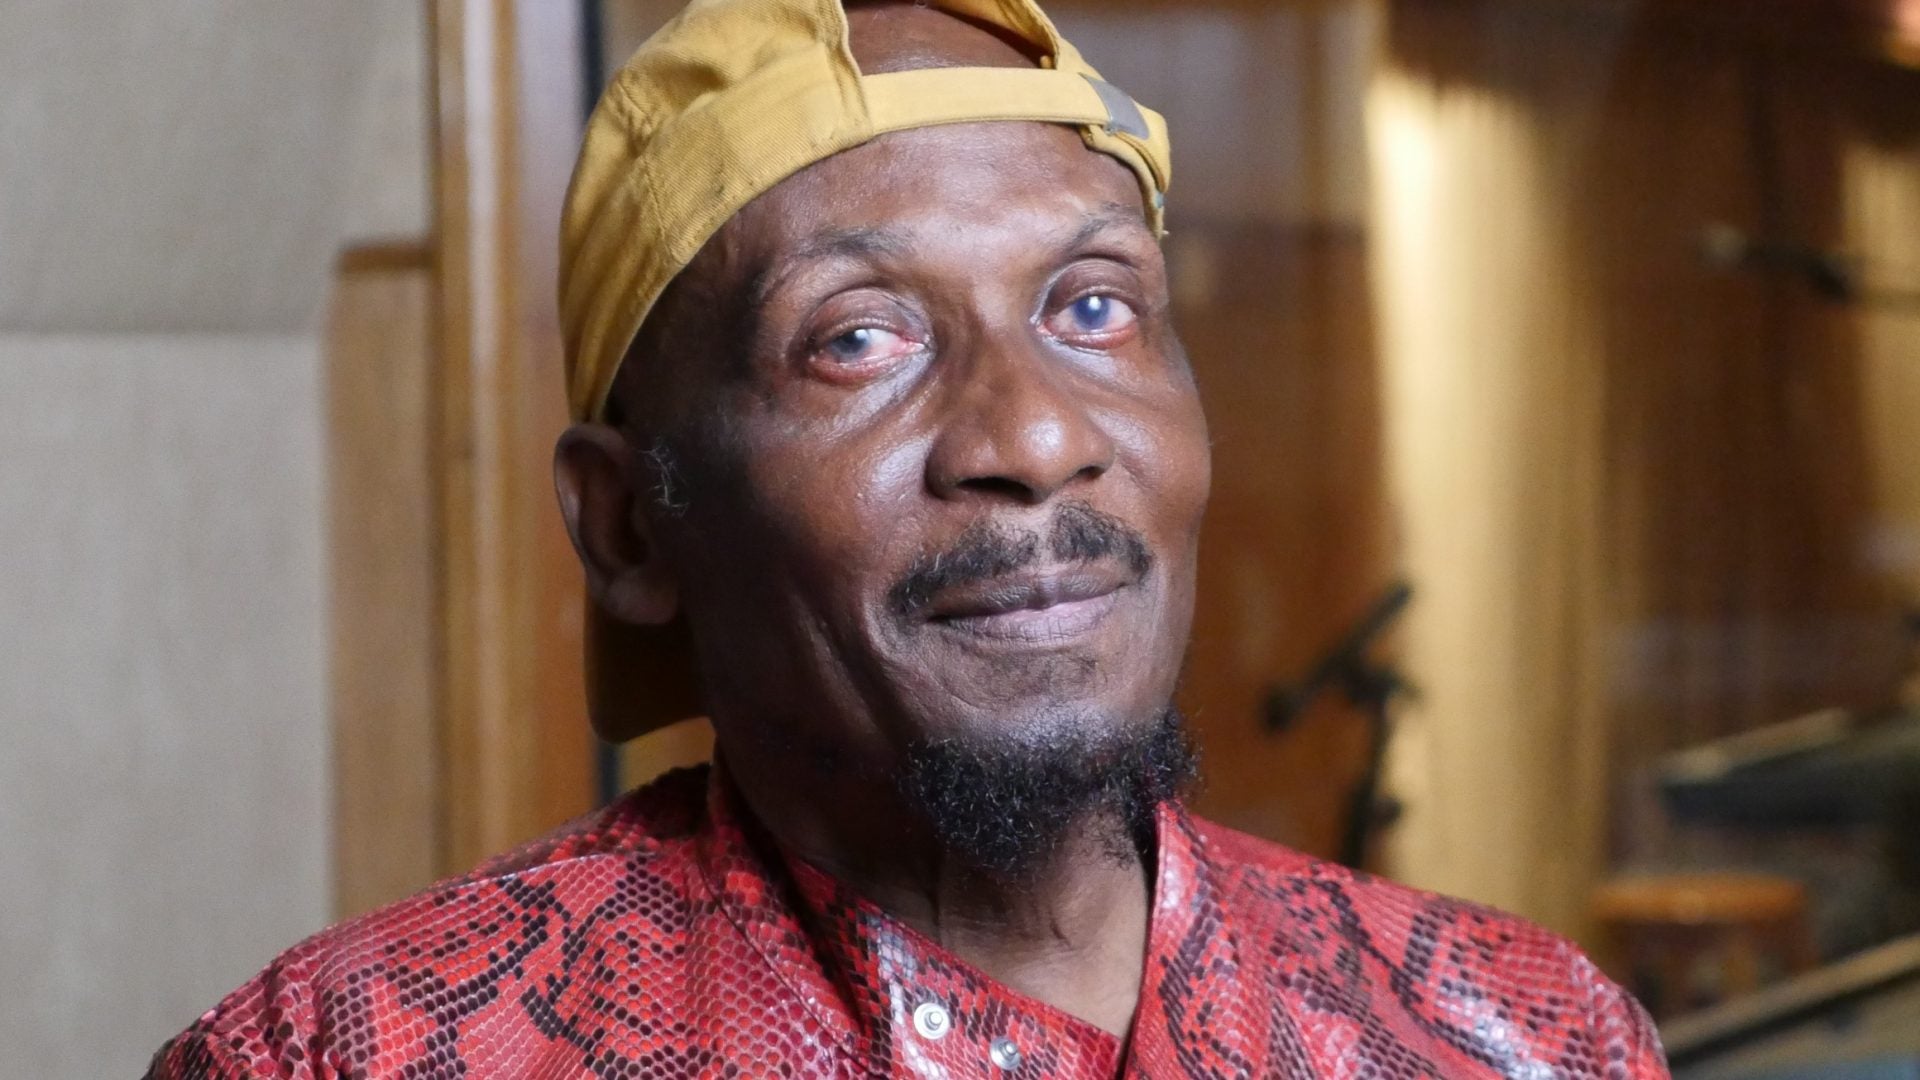 Watch: Reggae's Glory Days Are Revisited In Must-See Documentary